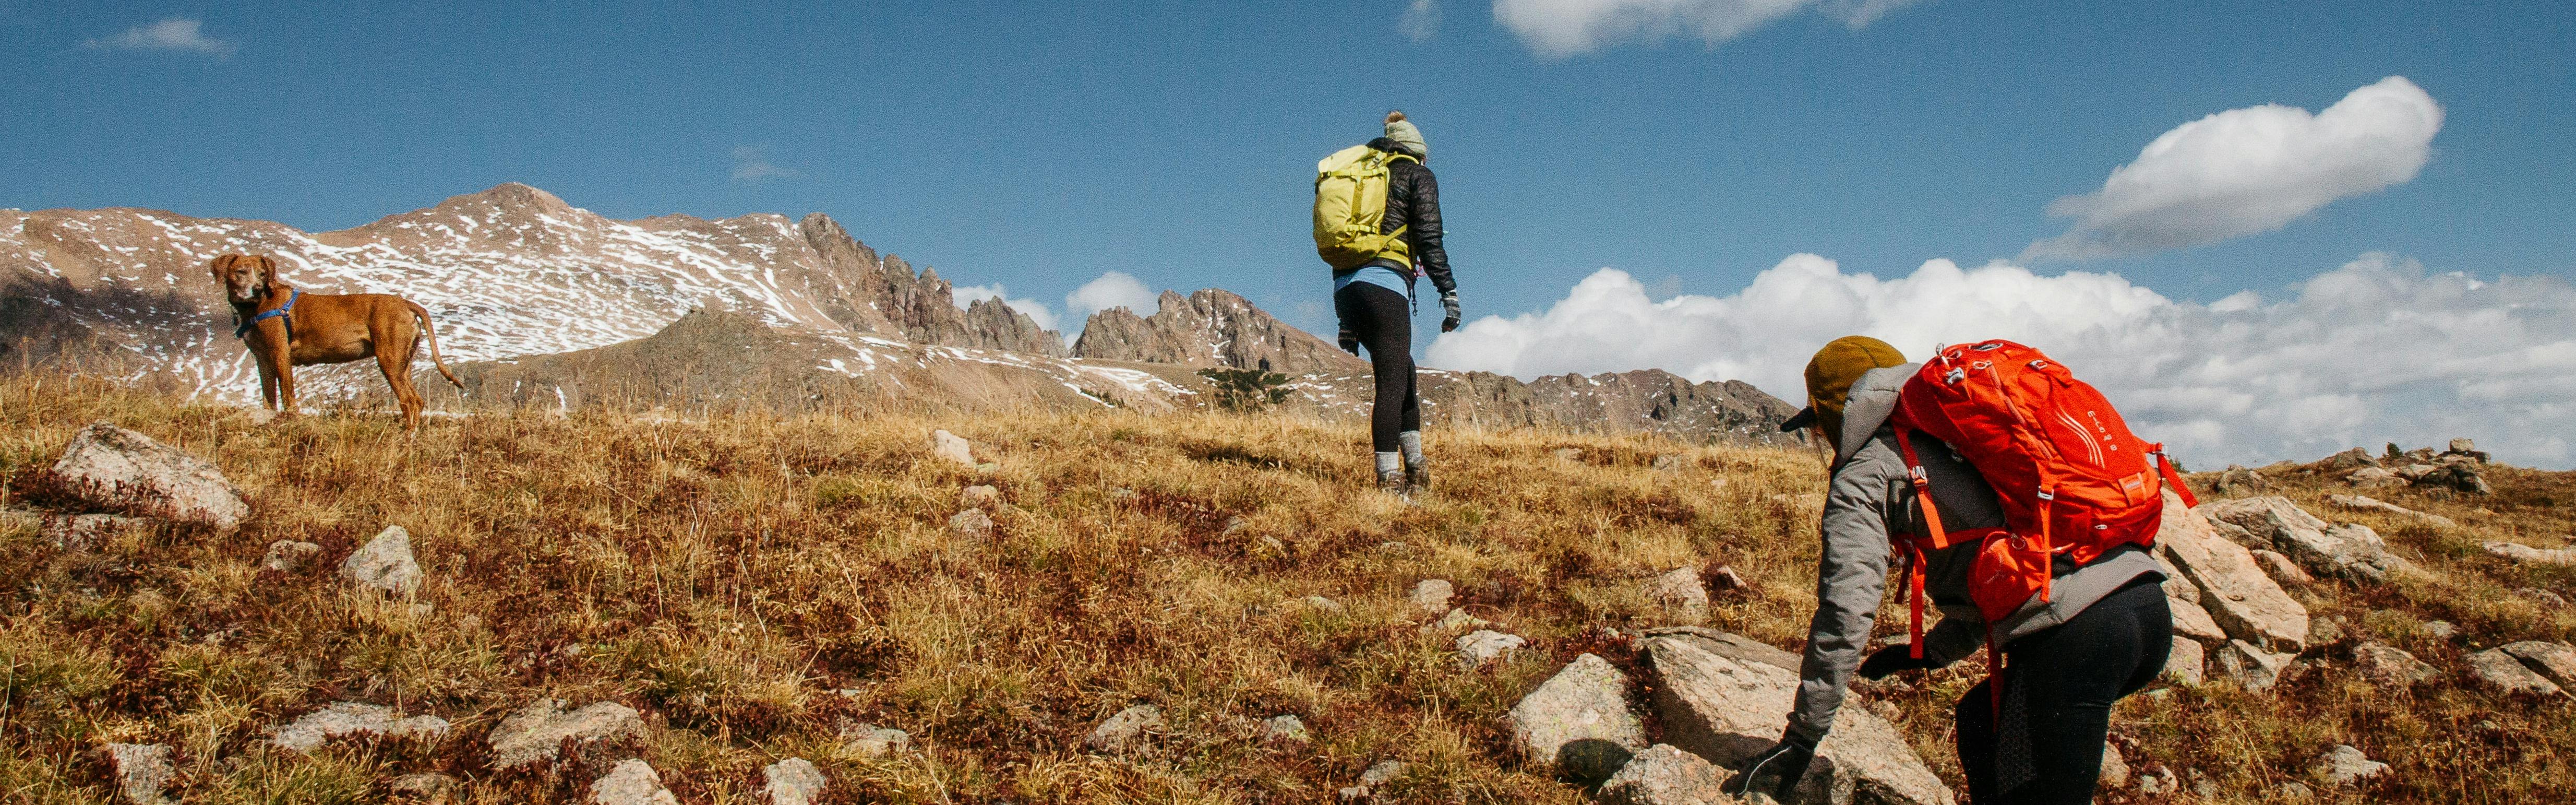 An Expert Guide to What to Wear Hiking